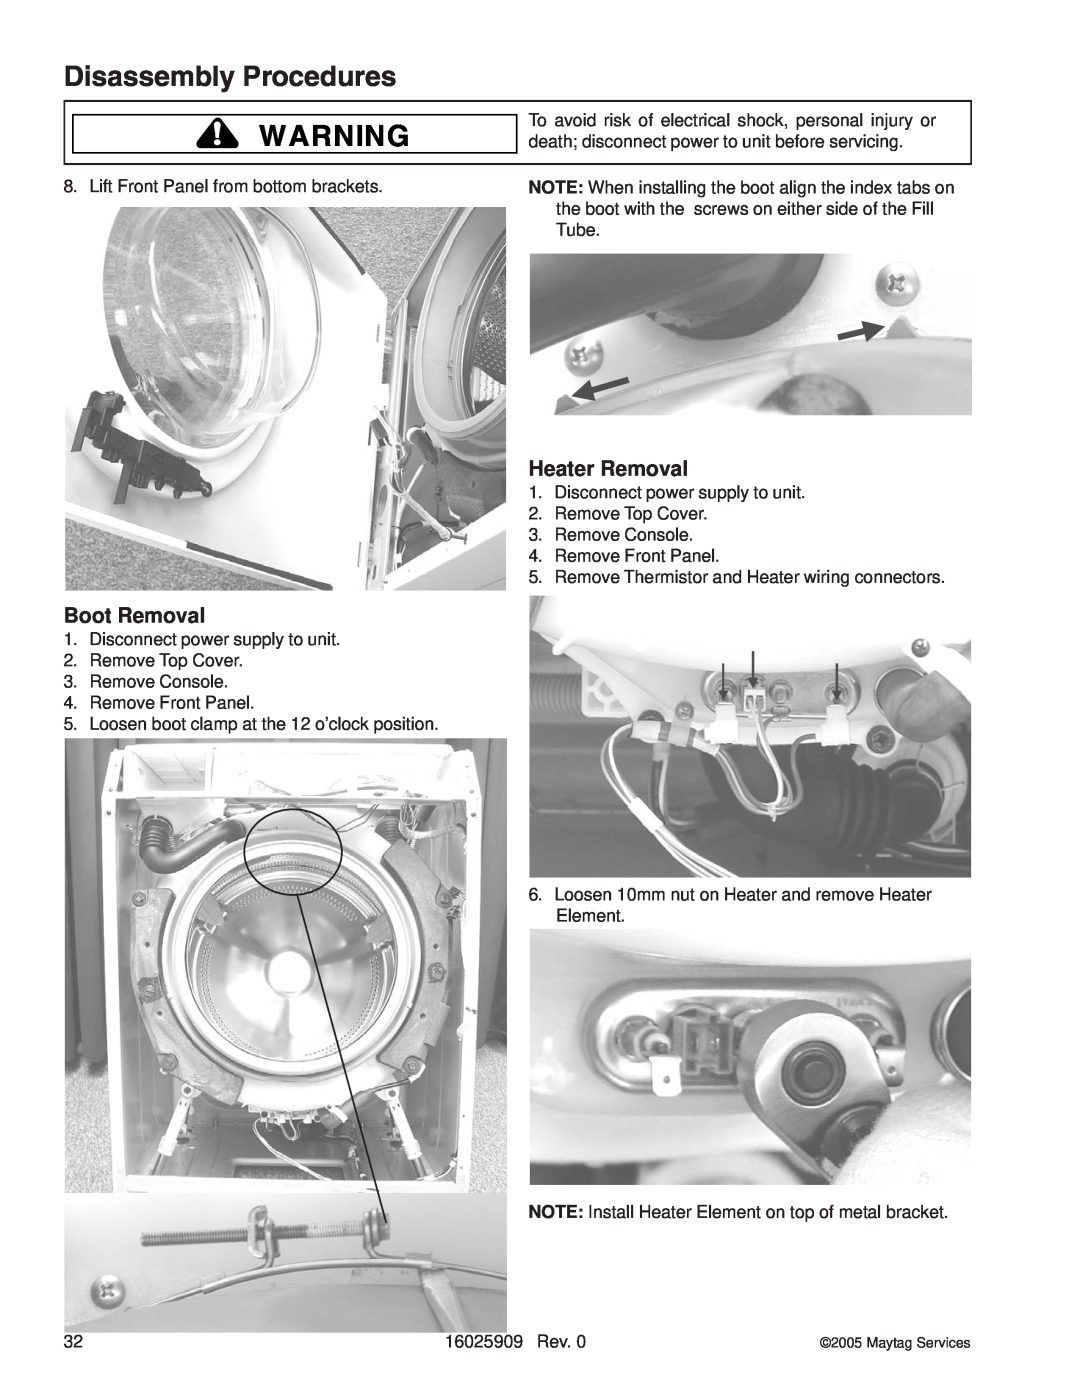 Whirlpool MAH9700AW manual Heater Removal, Boot Removal, Disassembly Procedures, Maytag Services 